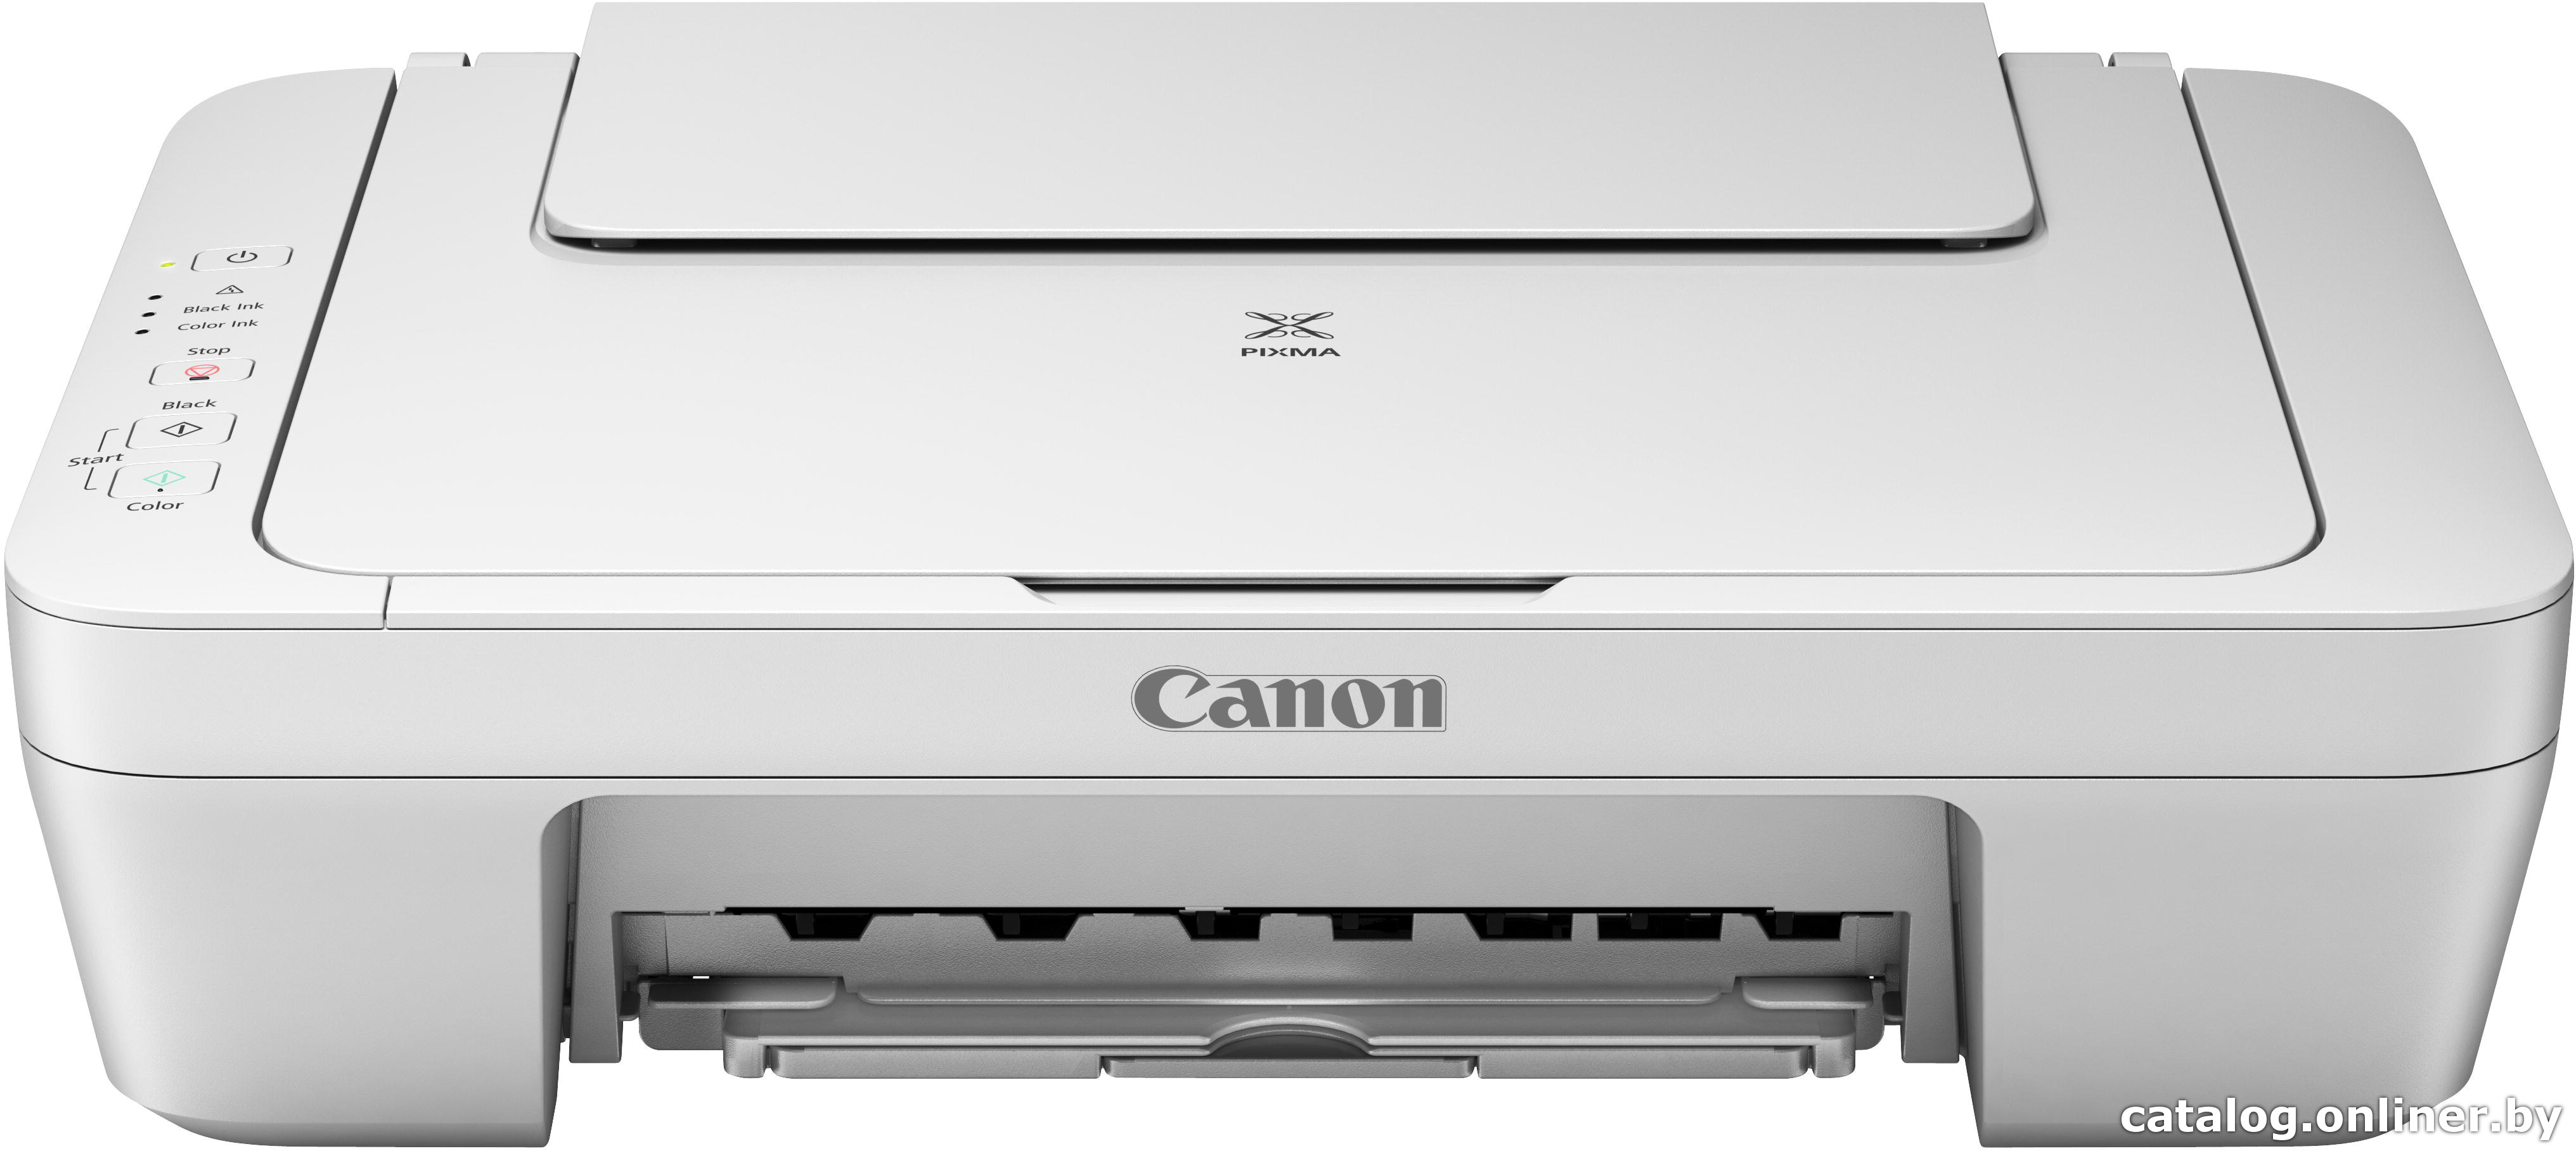 Canon MG2540 Driver Mac High Sierra How-to Download and Install - Featured